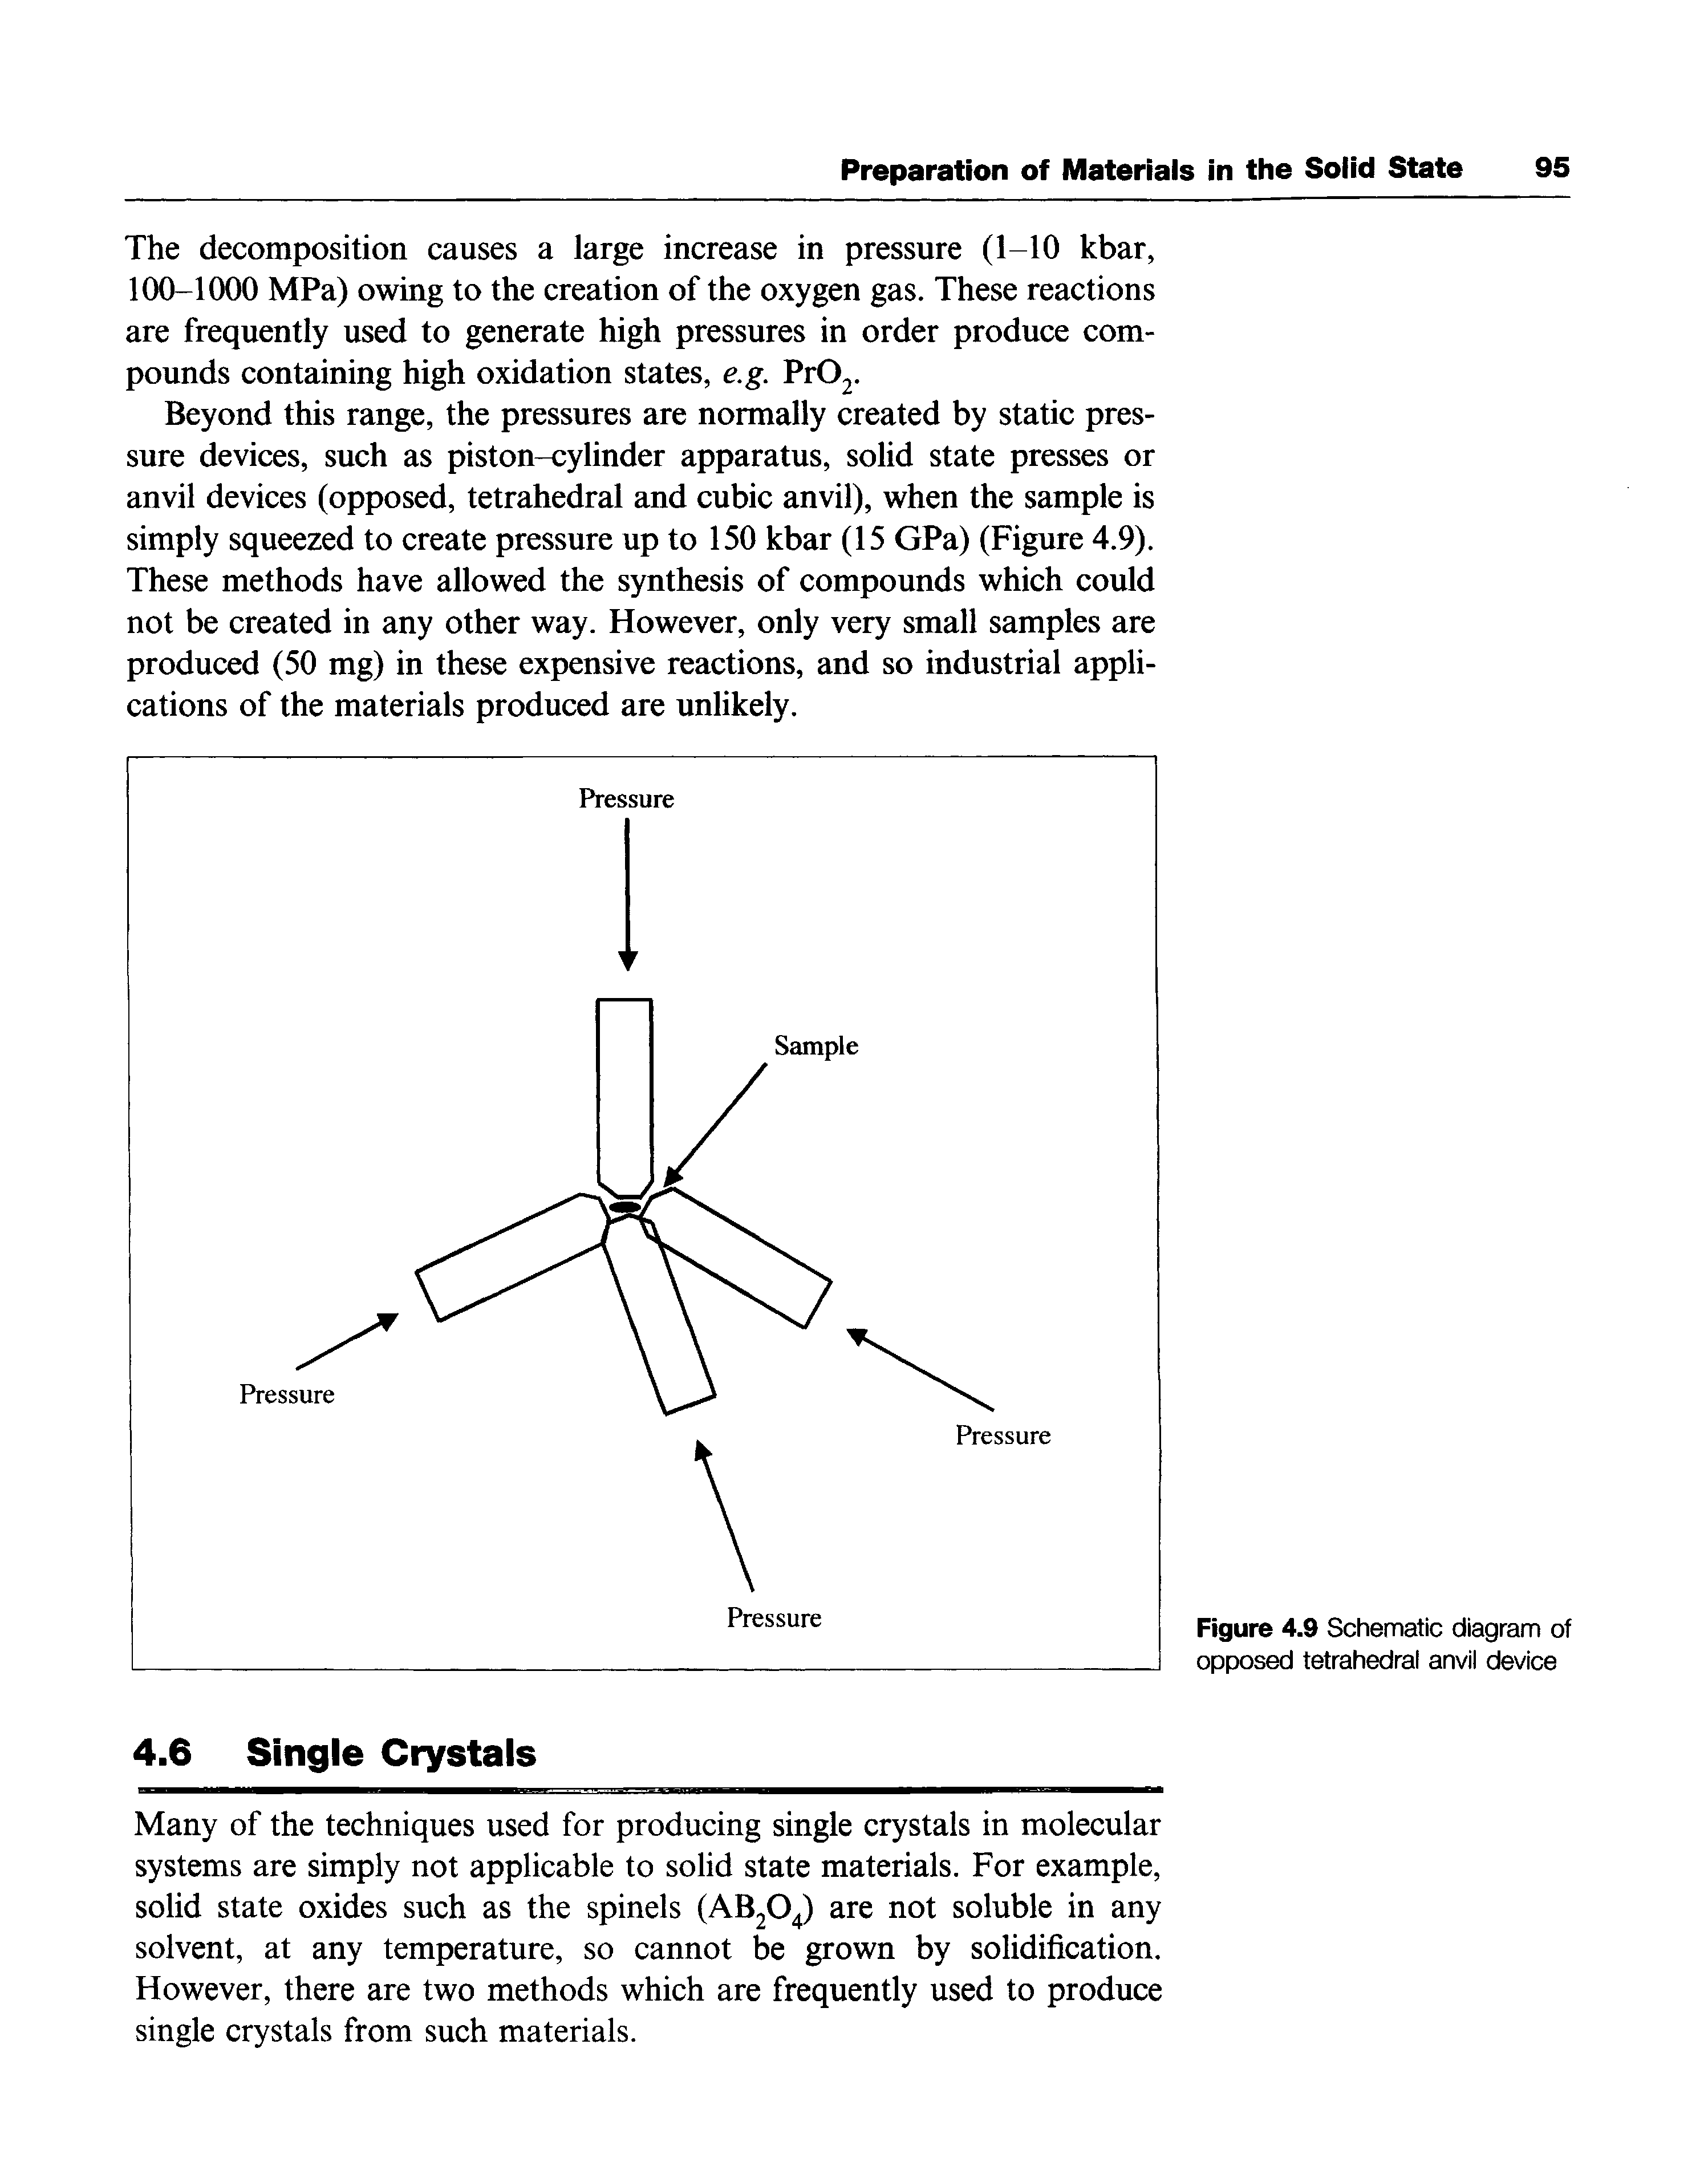 Figure 4.9 Schematic diagram of opposed tetrahedral anvil device...